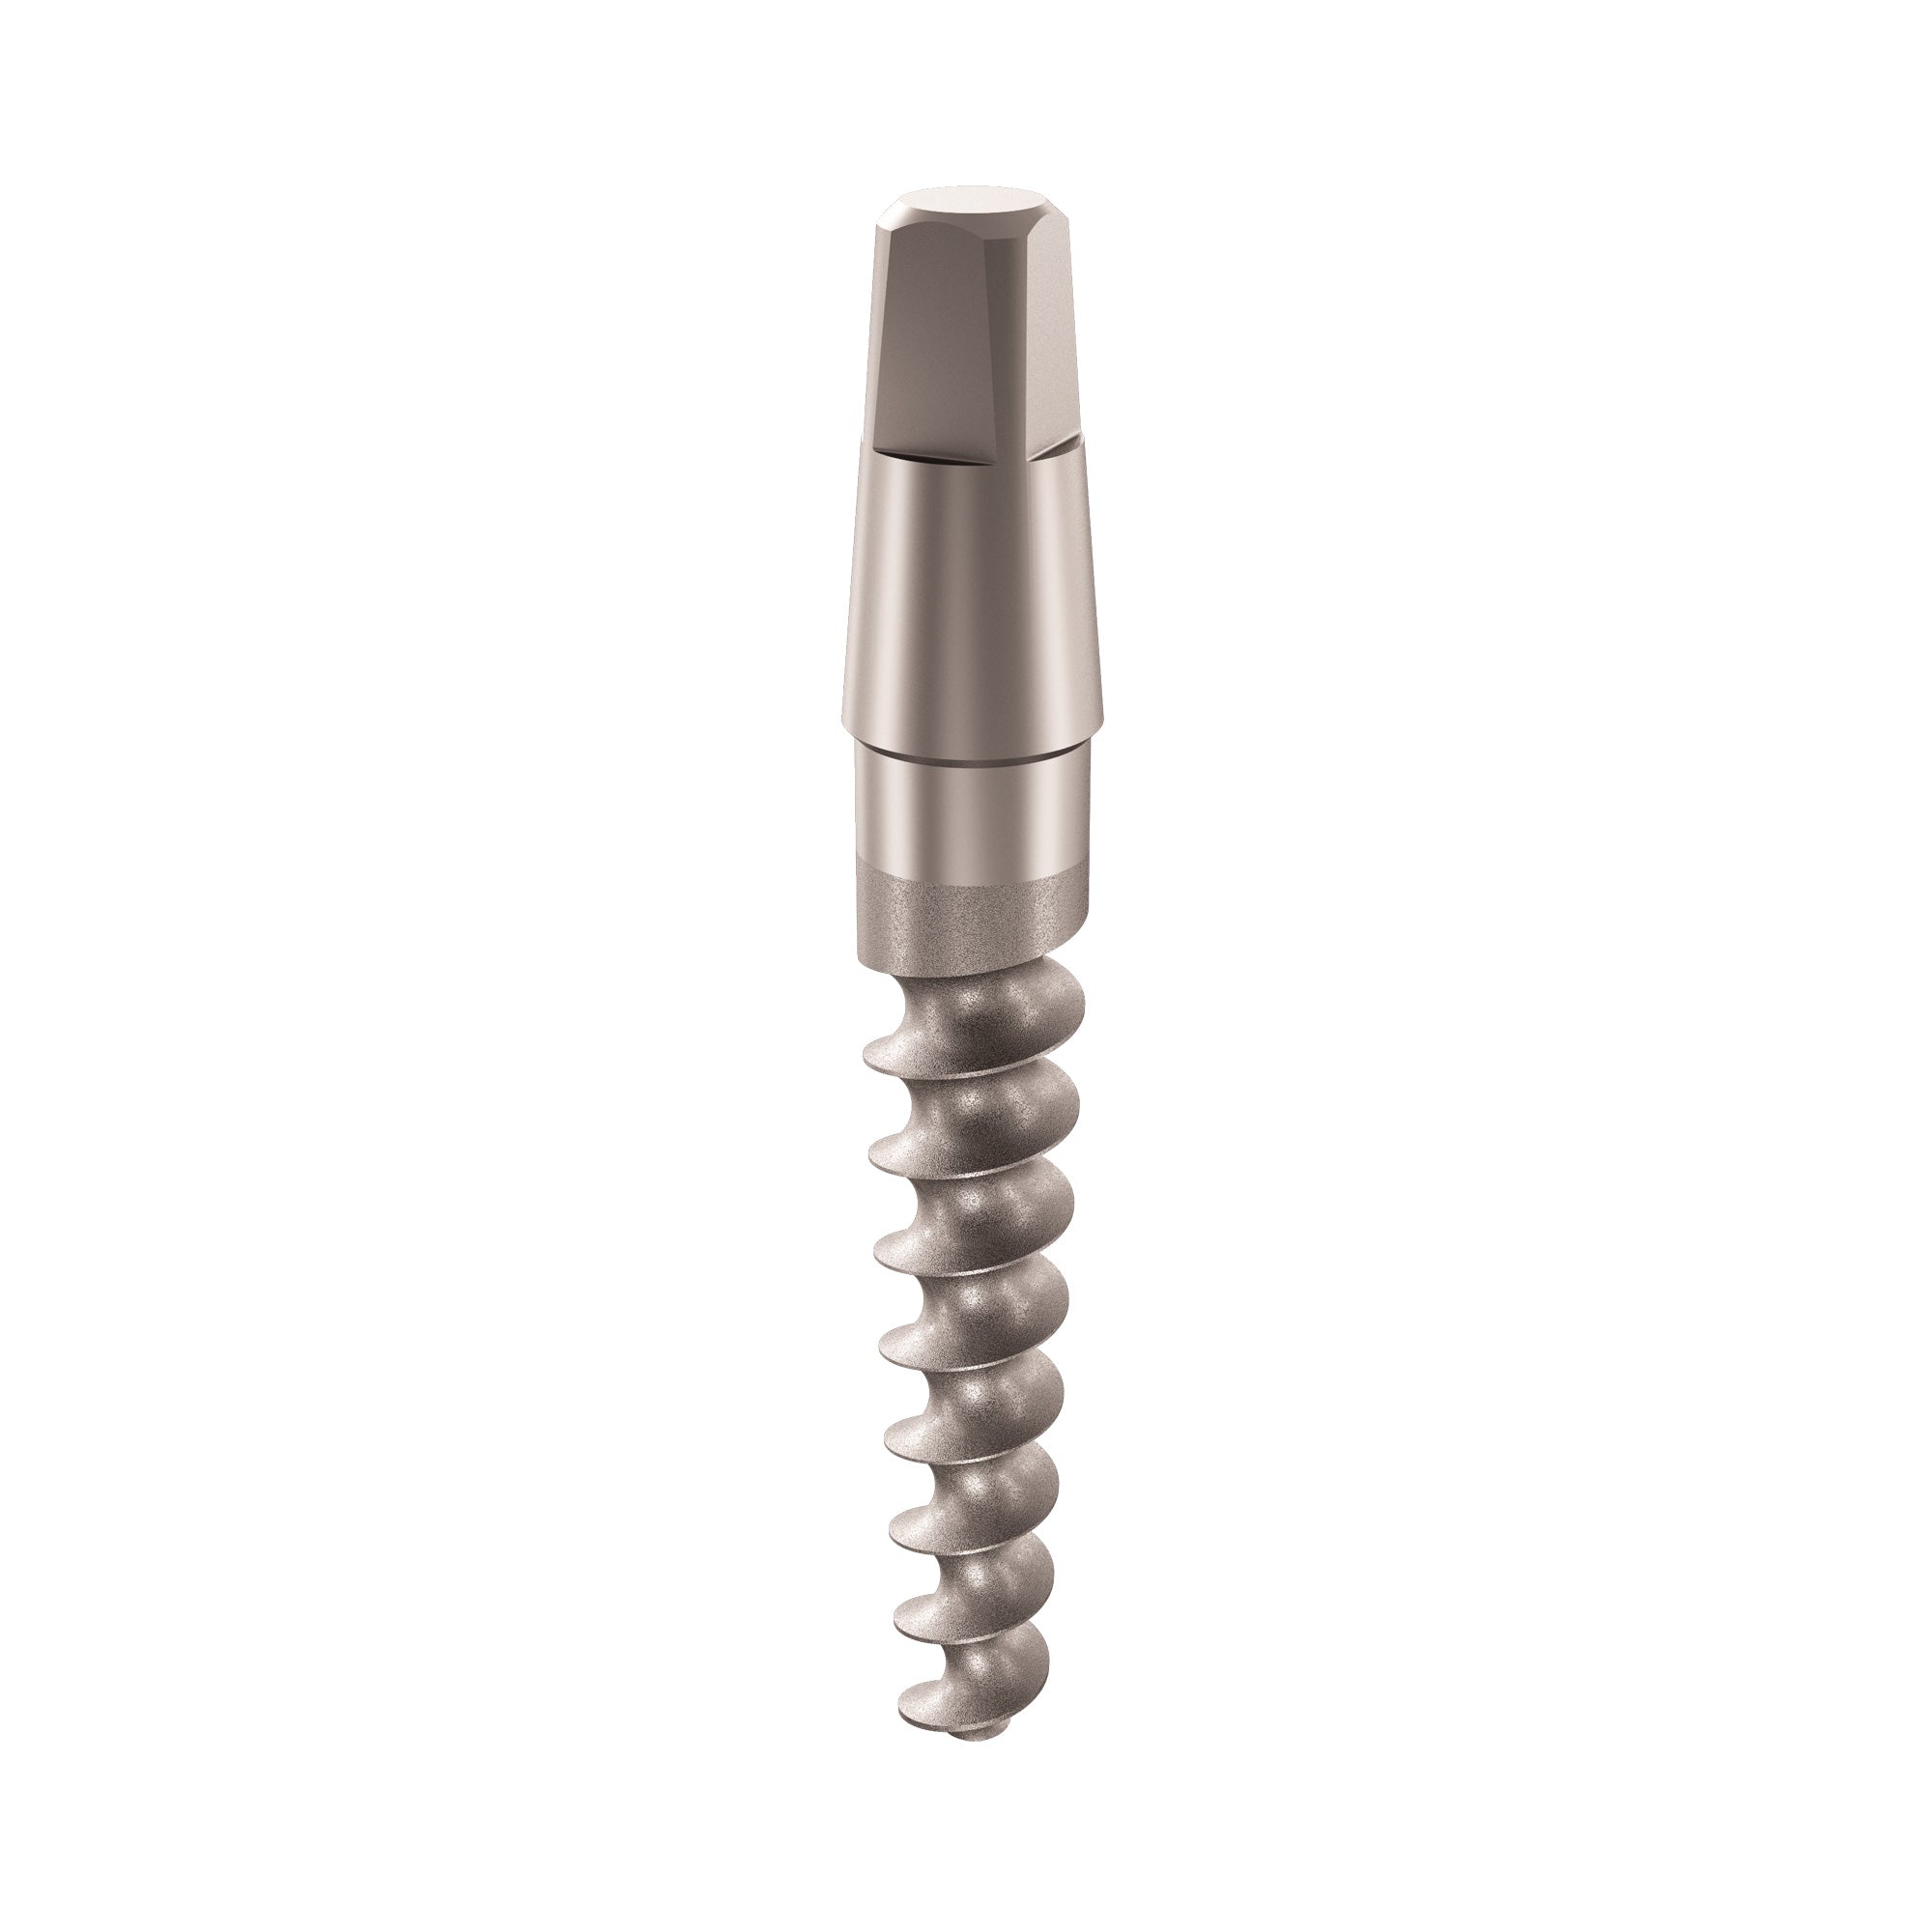 DSI One-Piece Immediate Implant WH - For Narrow Spaces